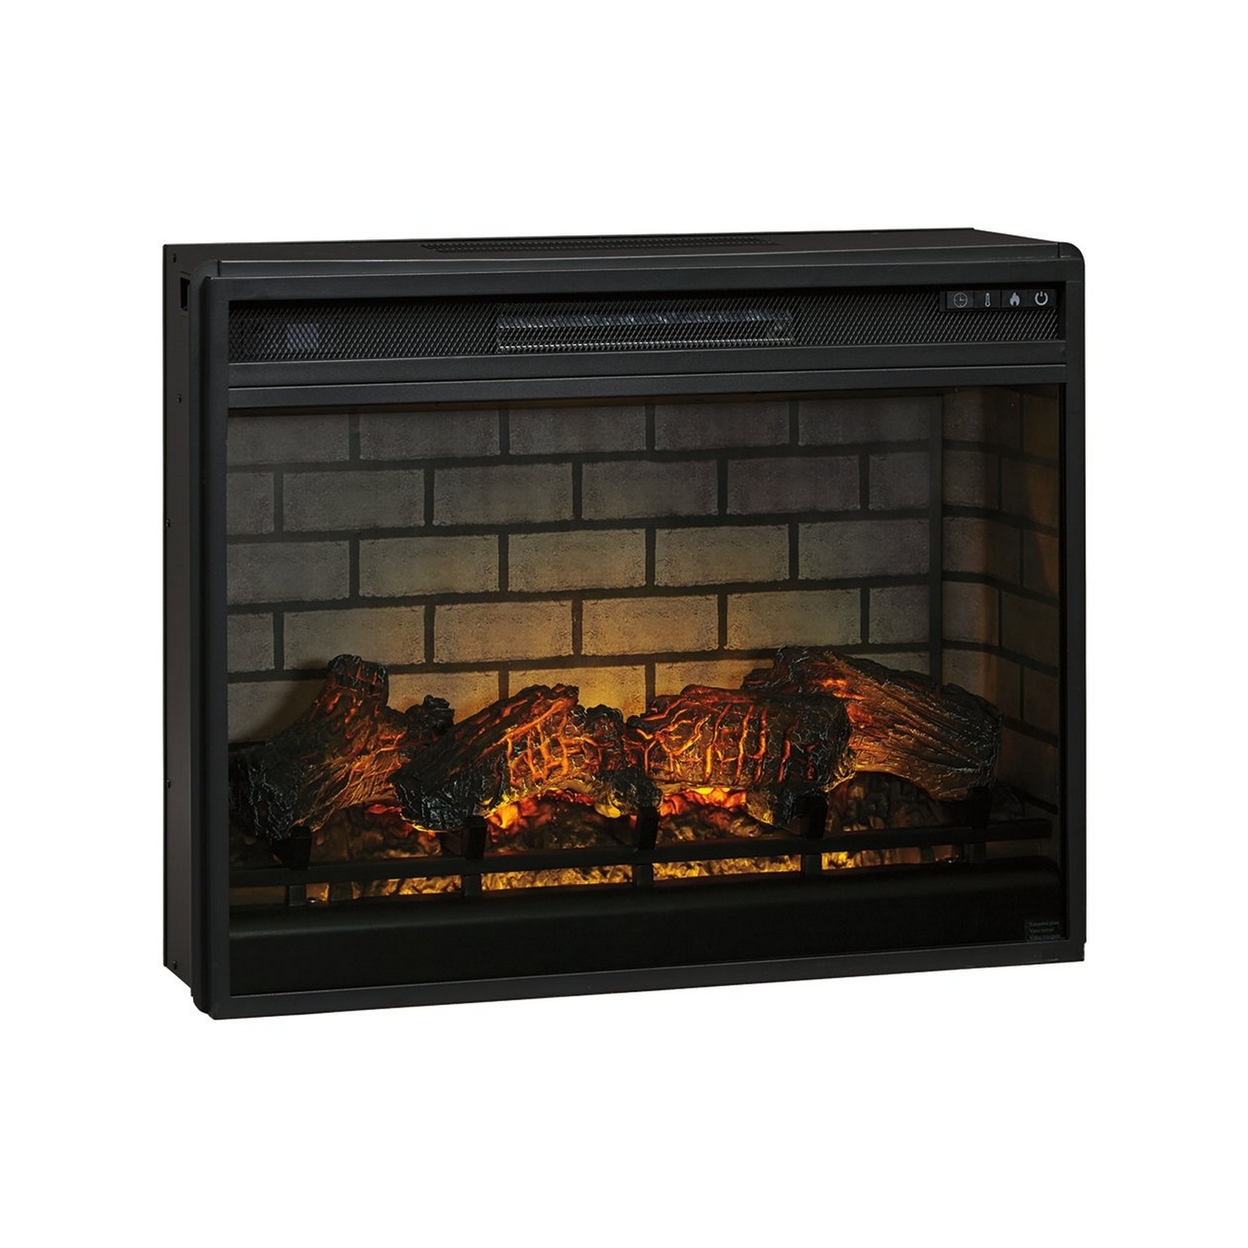 31.25 Inch Metal Fireplace Inset With 7 Level Temperature Setting, Black- Saltoro Sherpi